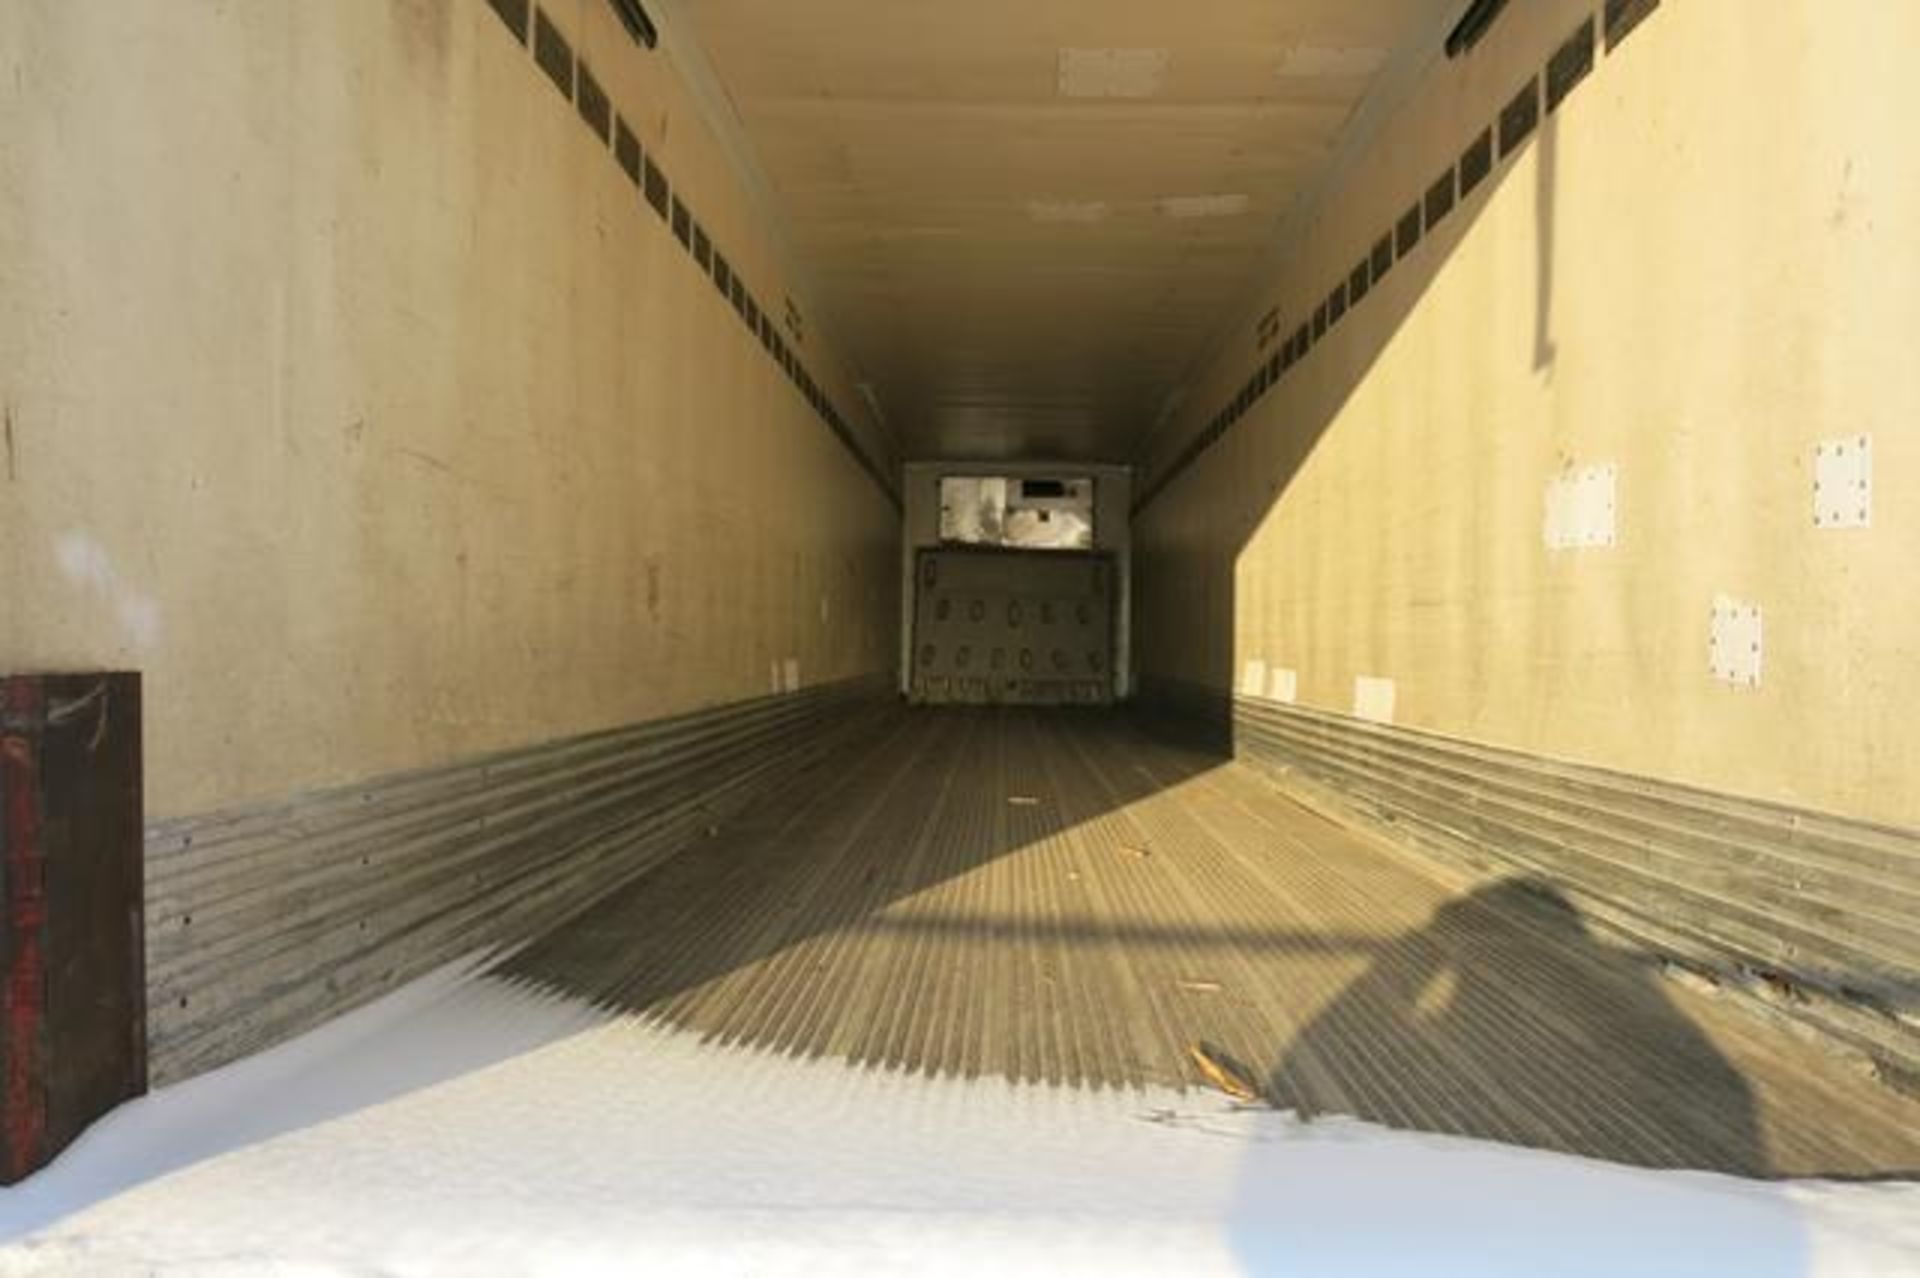 TRAILMOBILE, 53' REFRIGERATED VAN TRAILER, ROLLUP DOOR, THERMO KING, SB-210+, REEFER, 9,197 HOURS, - Image 5 of 13